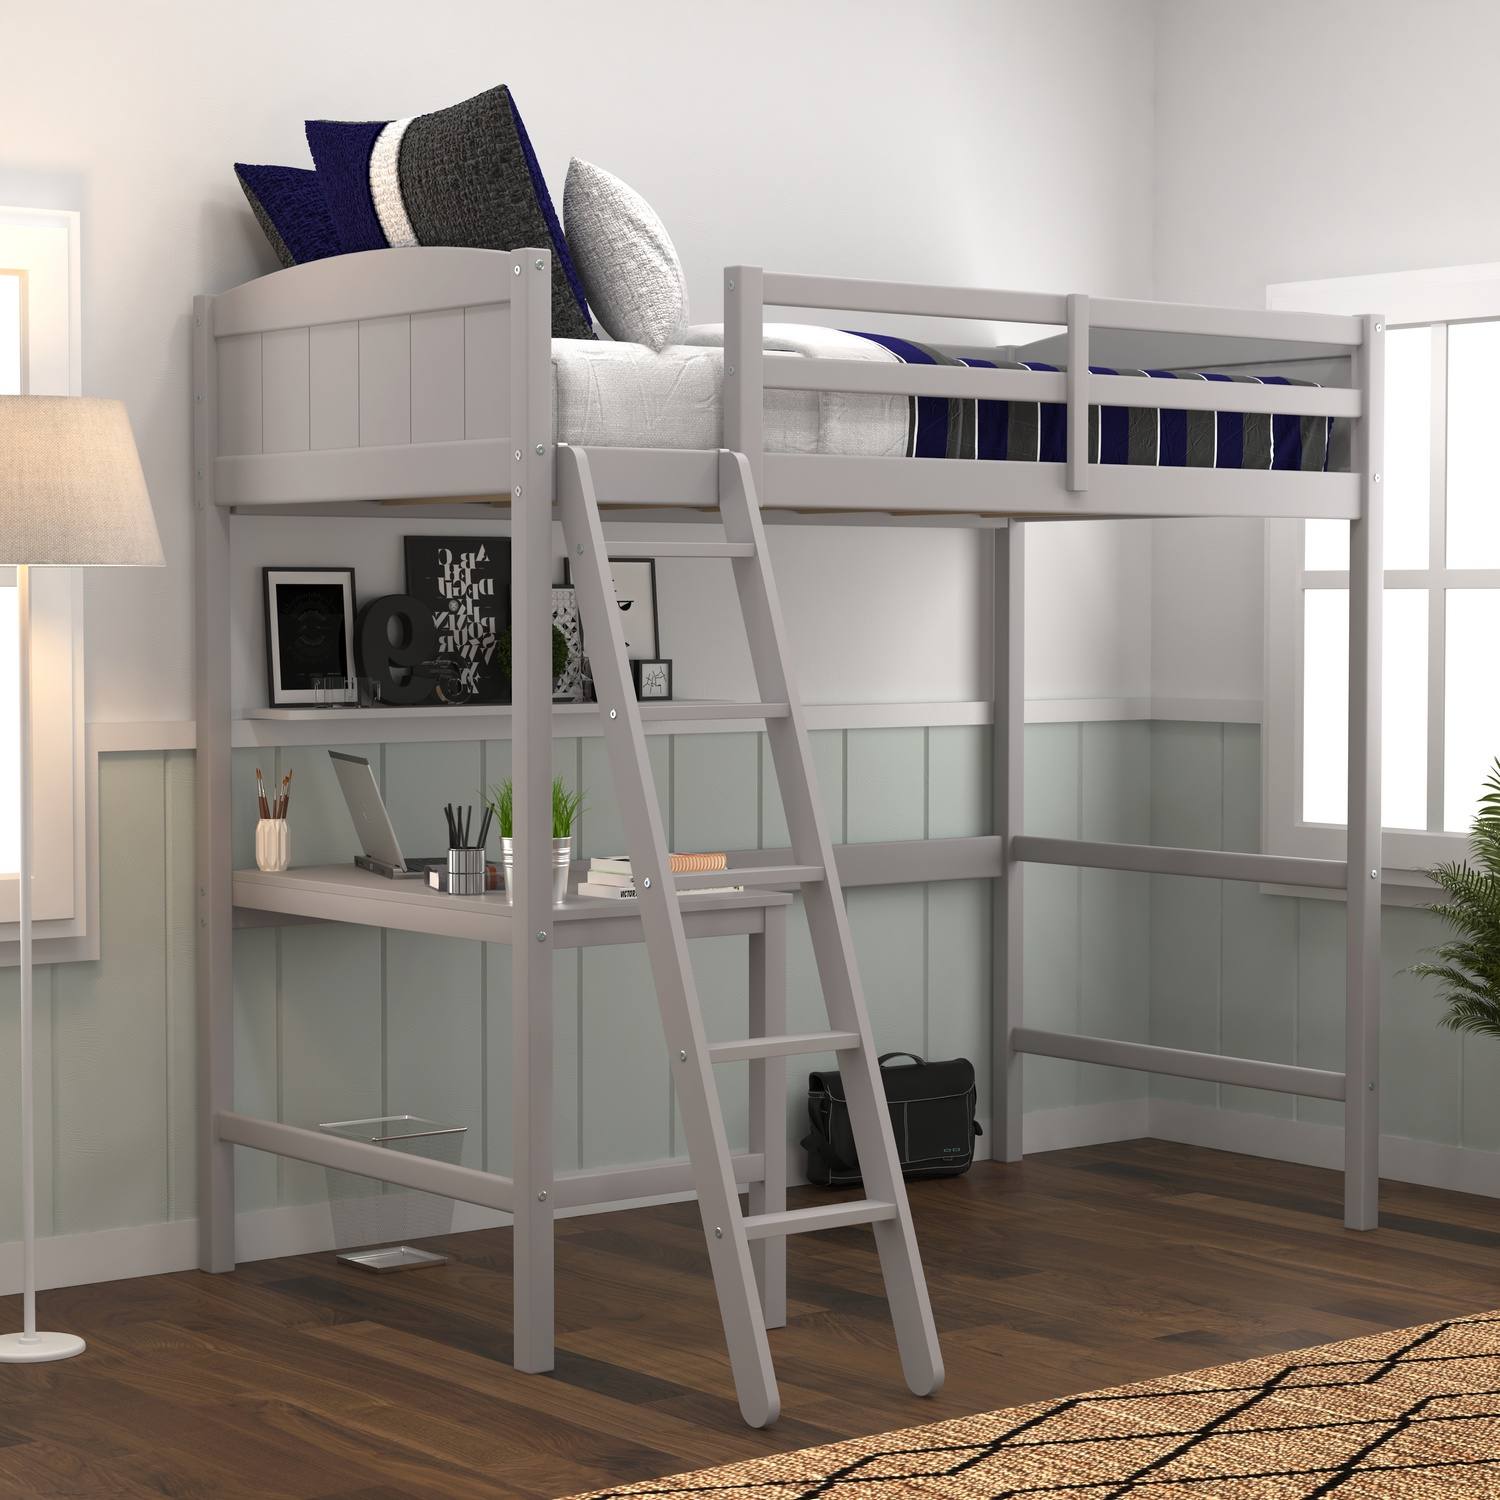 Hillsdale Alexis Wood Arch Twin Loft Bed with Desk - Gray